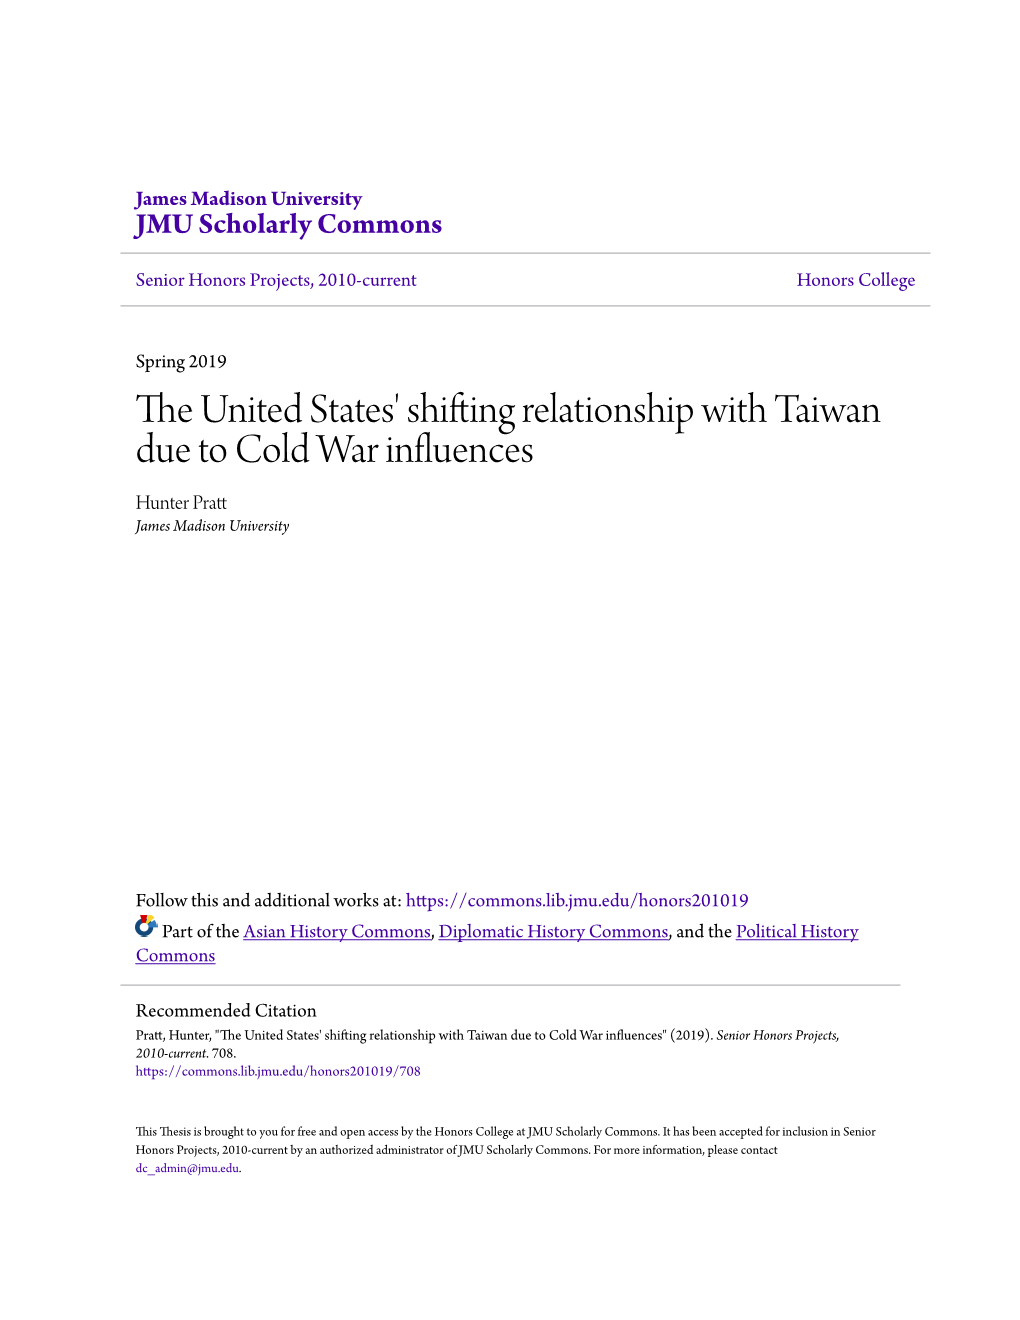 The United States' Shifting Relationship with Taiwan Due to Cold War Influences